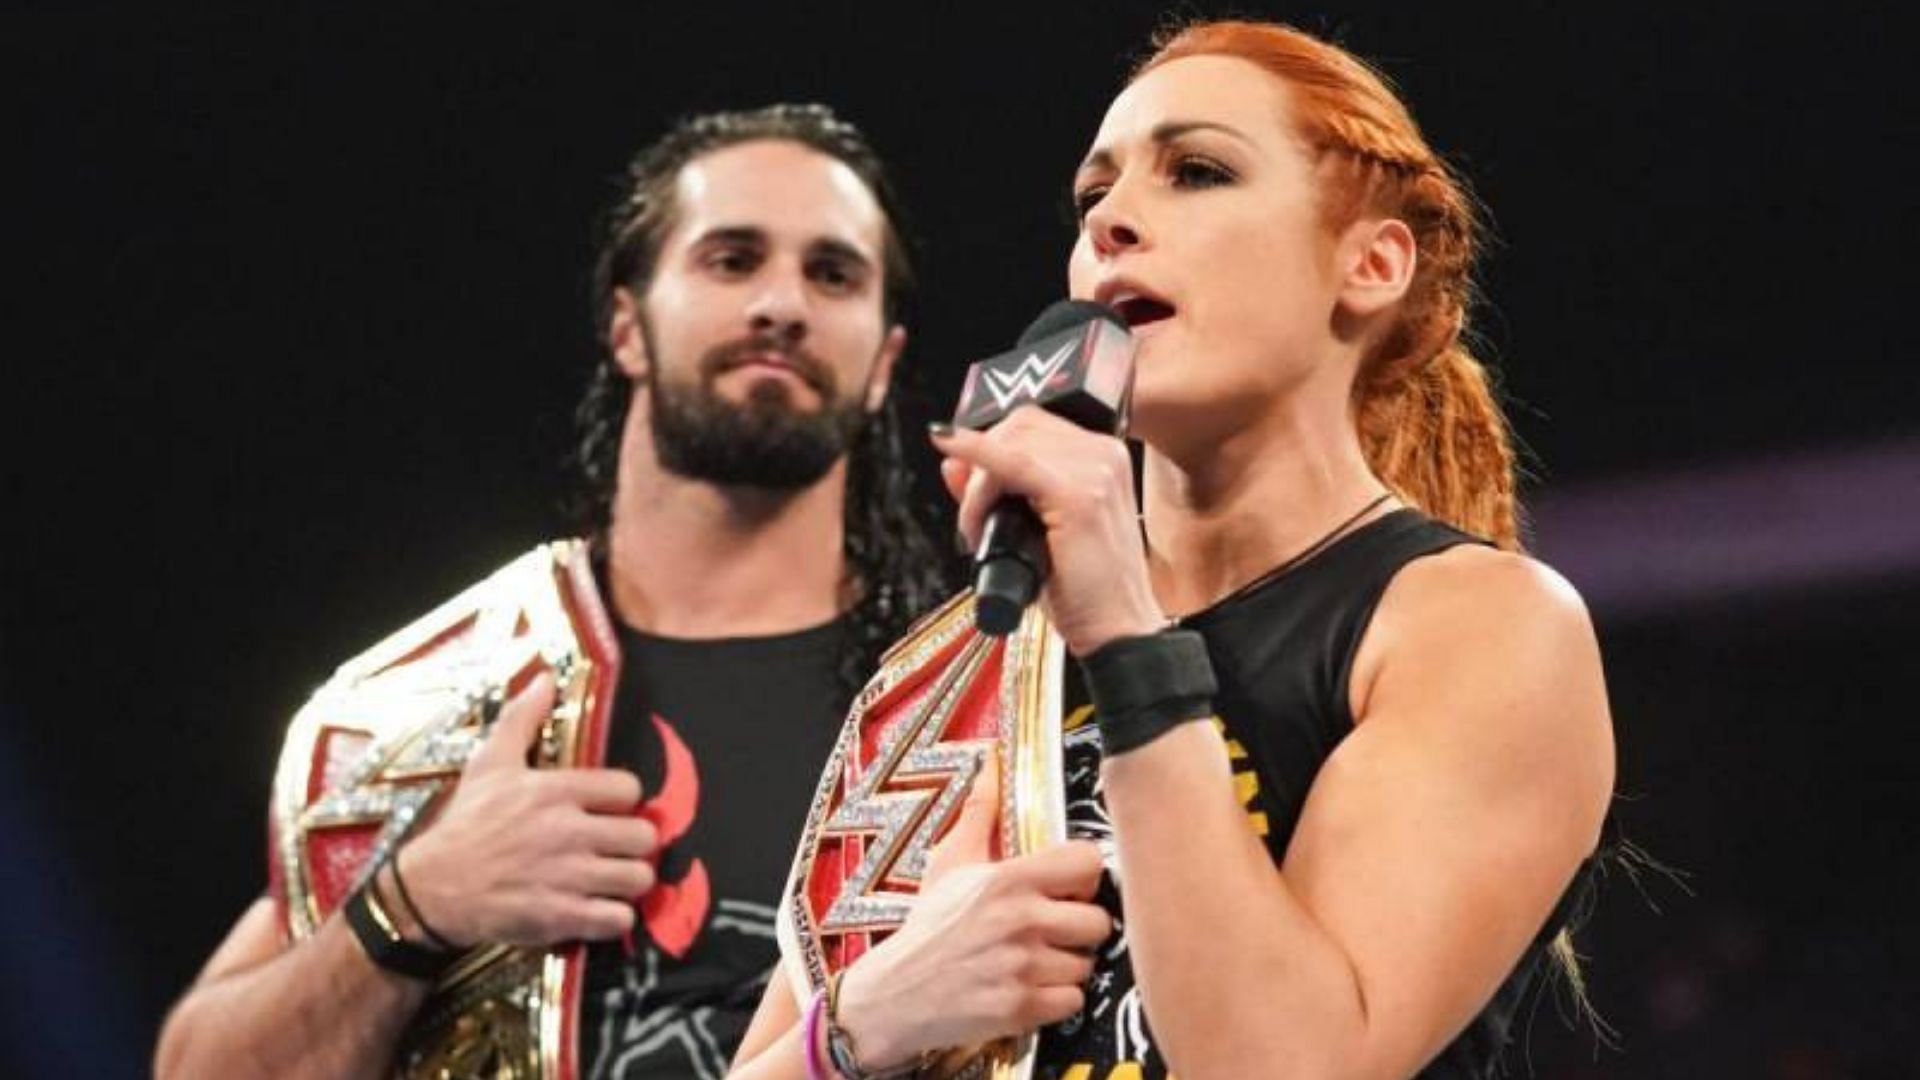 Seth Rollins and Becky Lynch have been an integral part of RAW